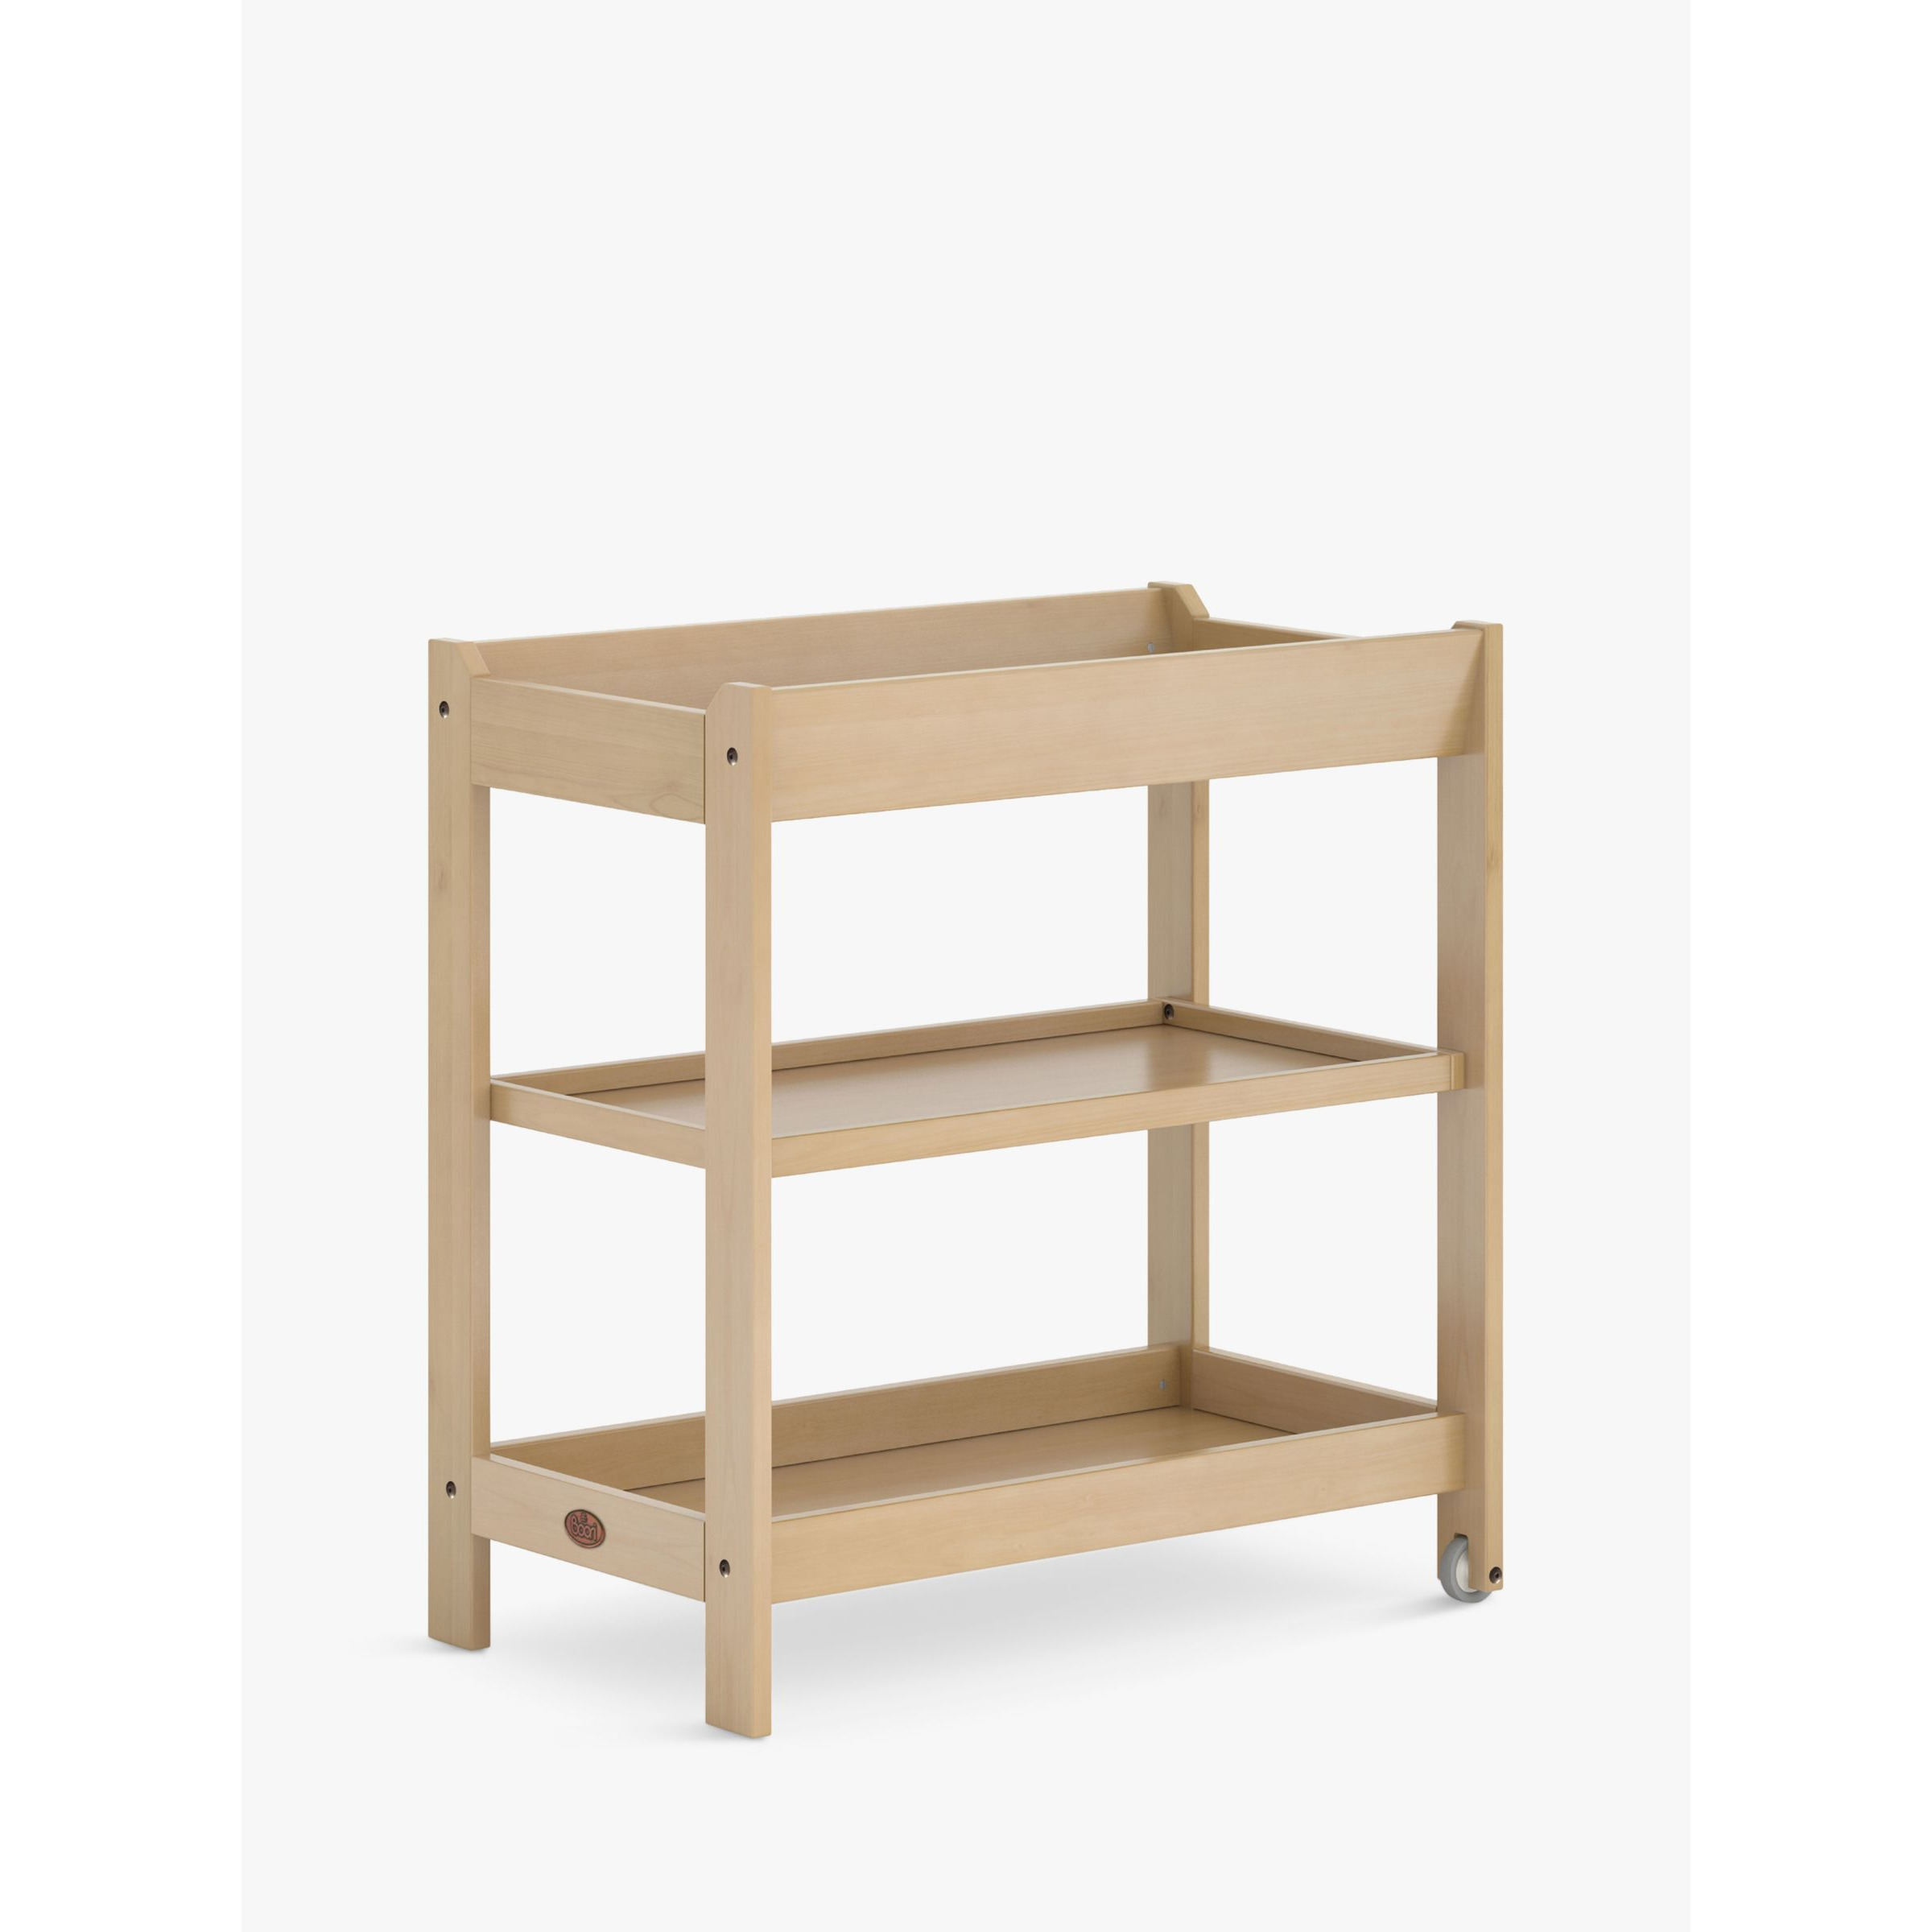 Boori 3 Tier Changing Table - image 1